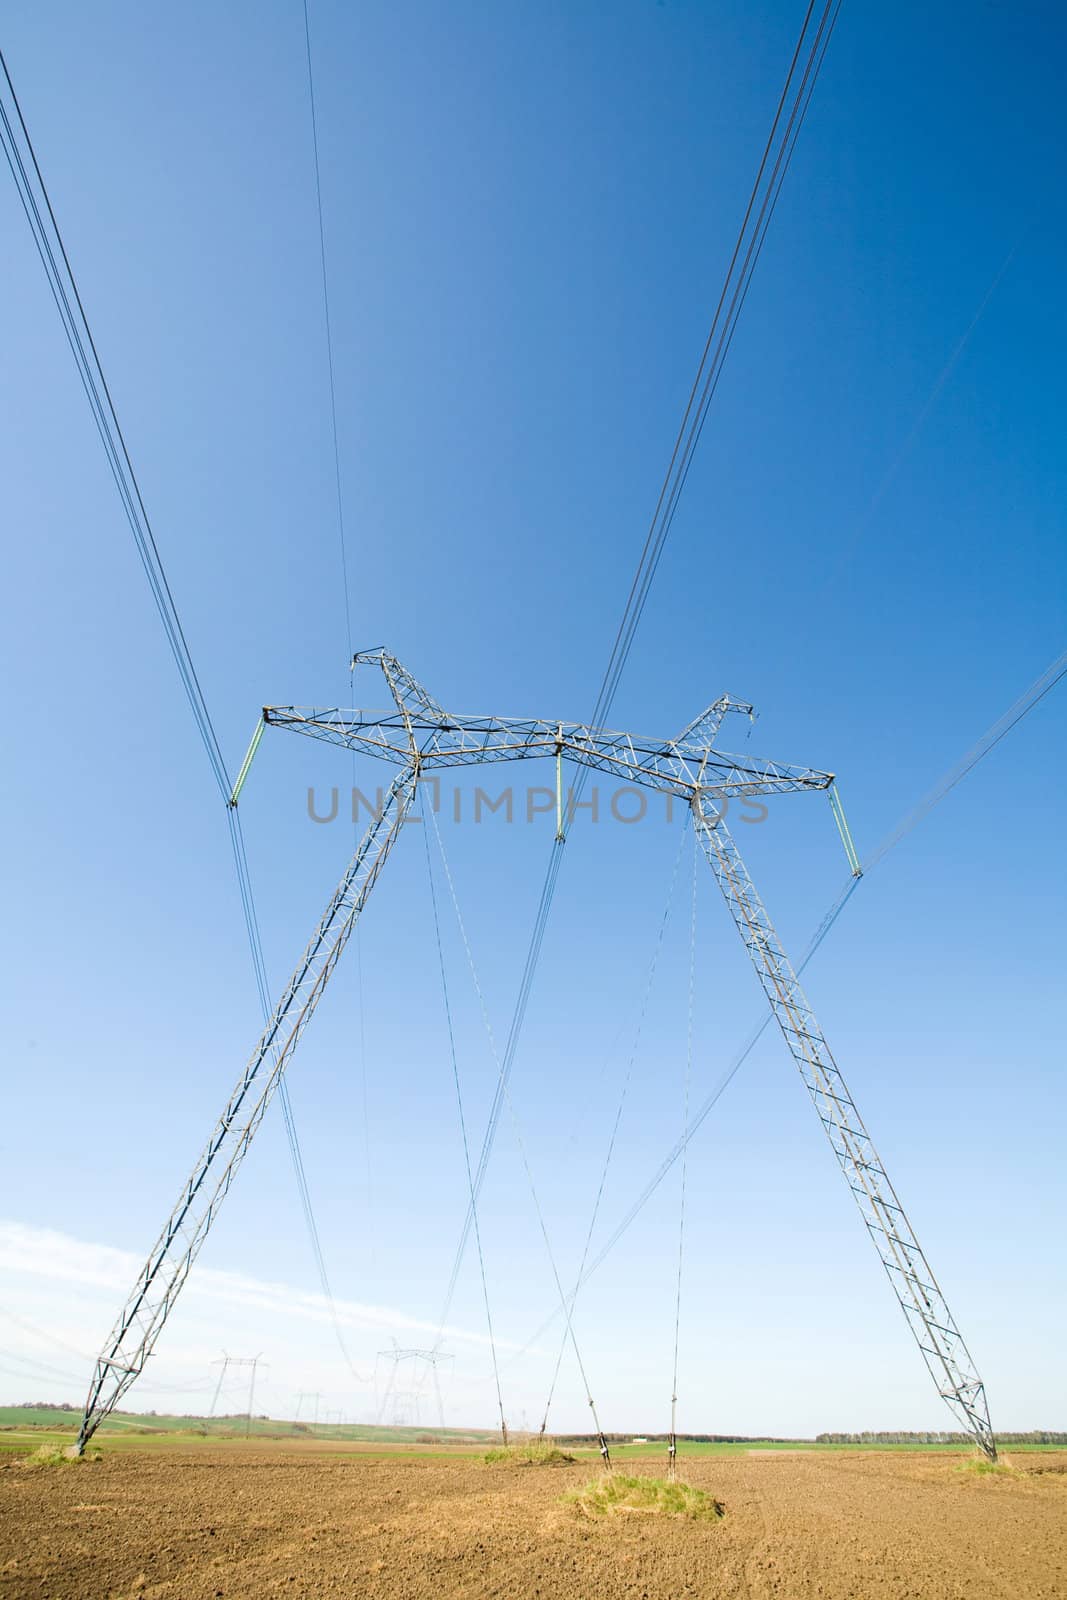 High voltage pylons on the background  of  blue  cloudless  sky

